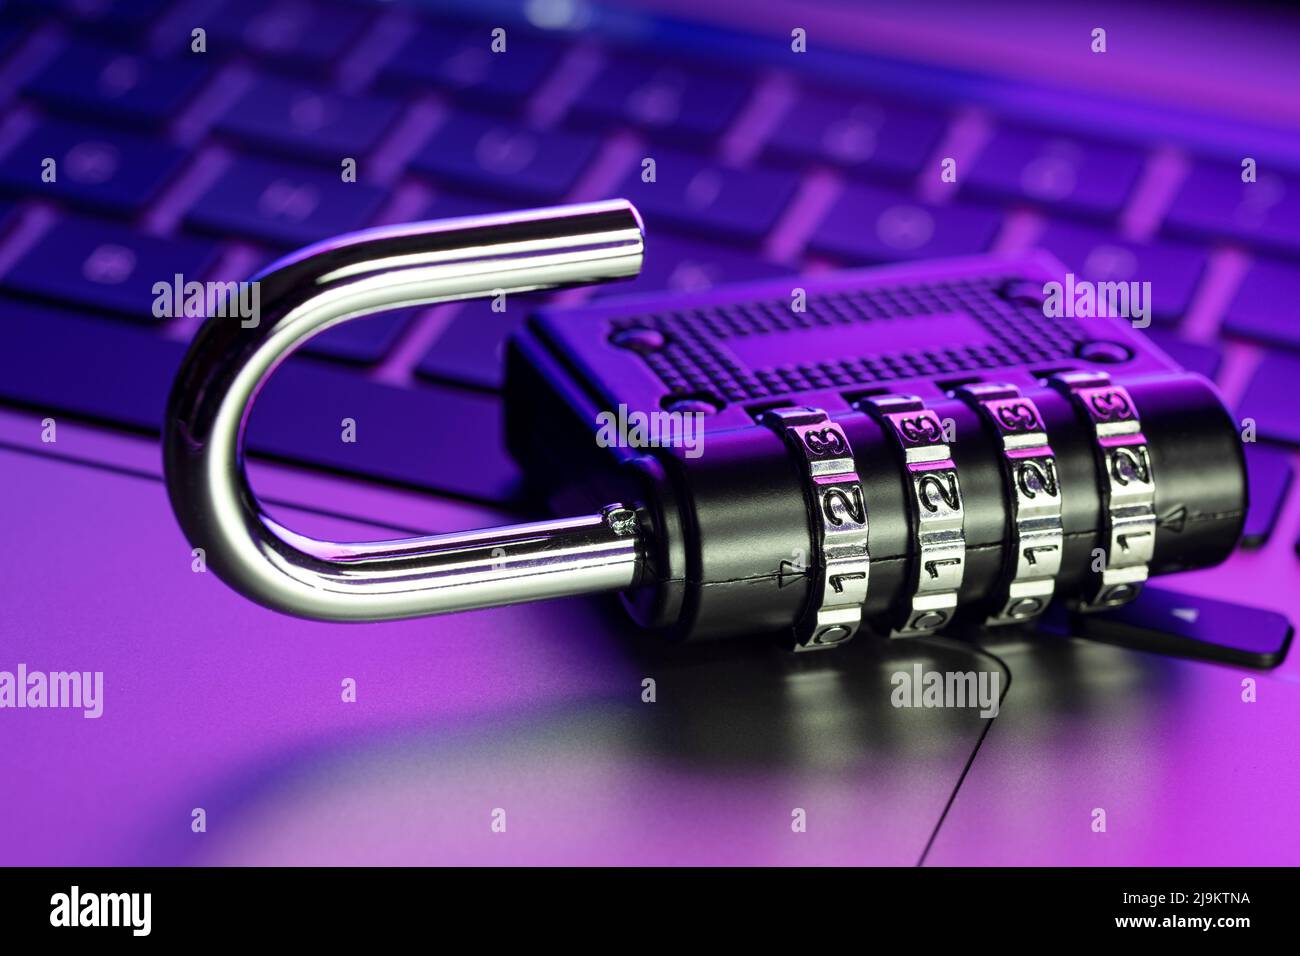 Computer Security Vulnerability concept. Open padlock on laptop with colorful lights Stock Photo